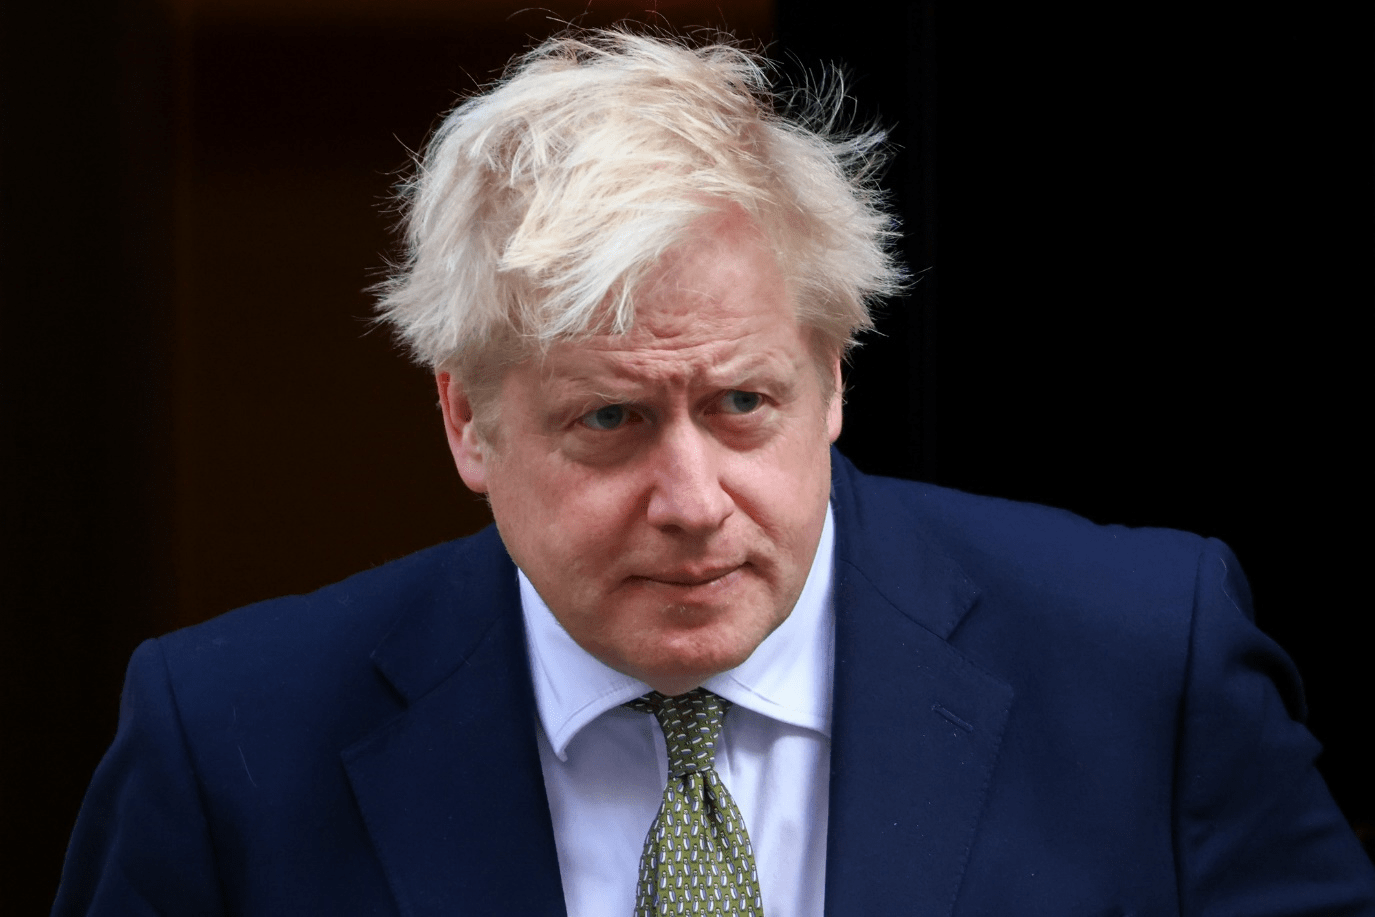 Brits could hug again with Boris Johnson set to ease lockdown